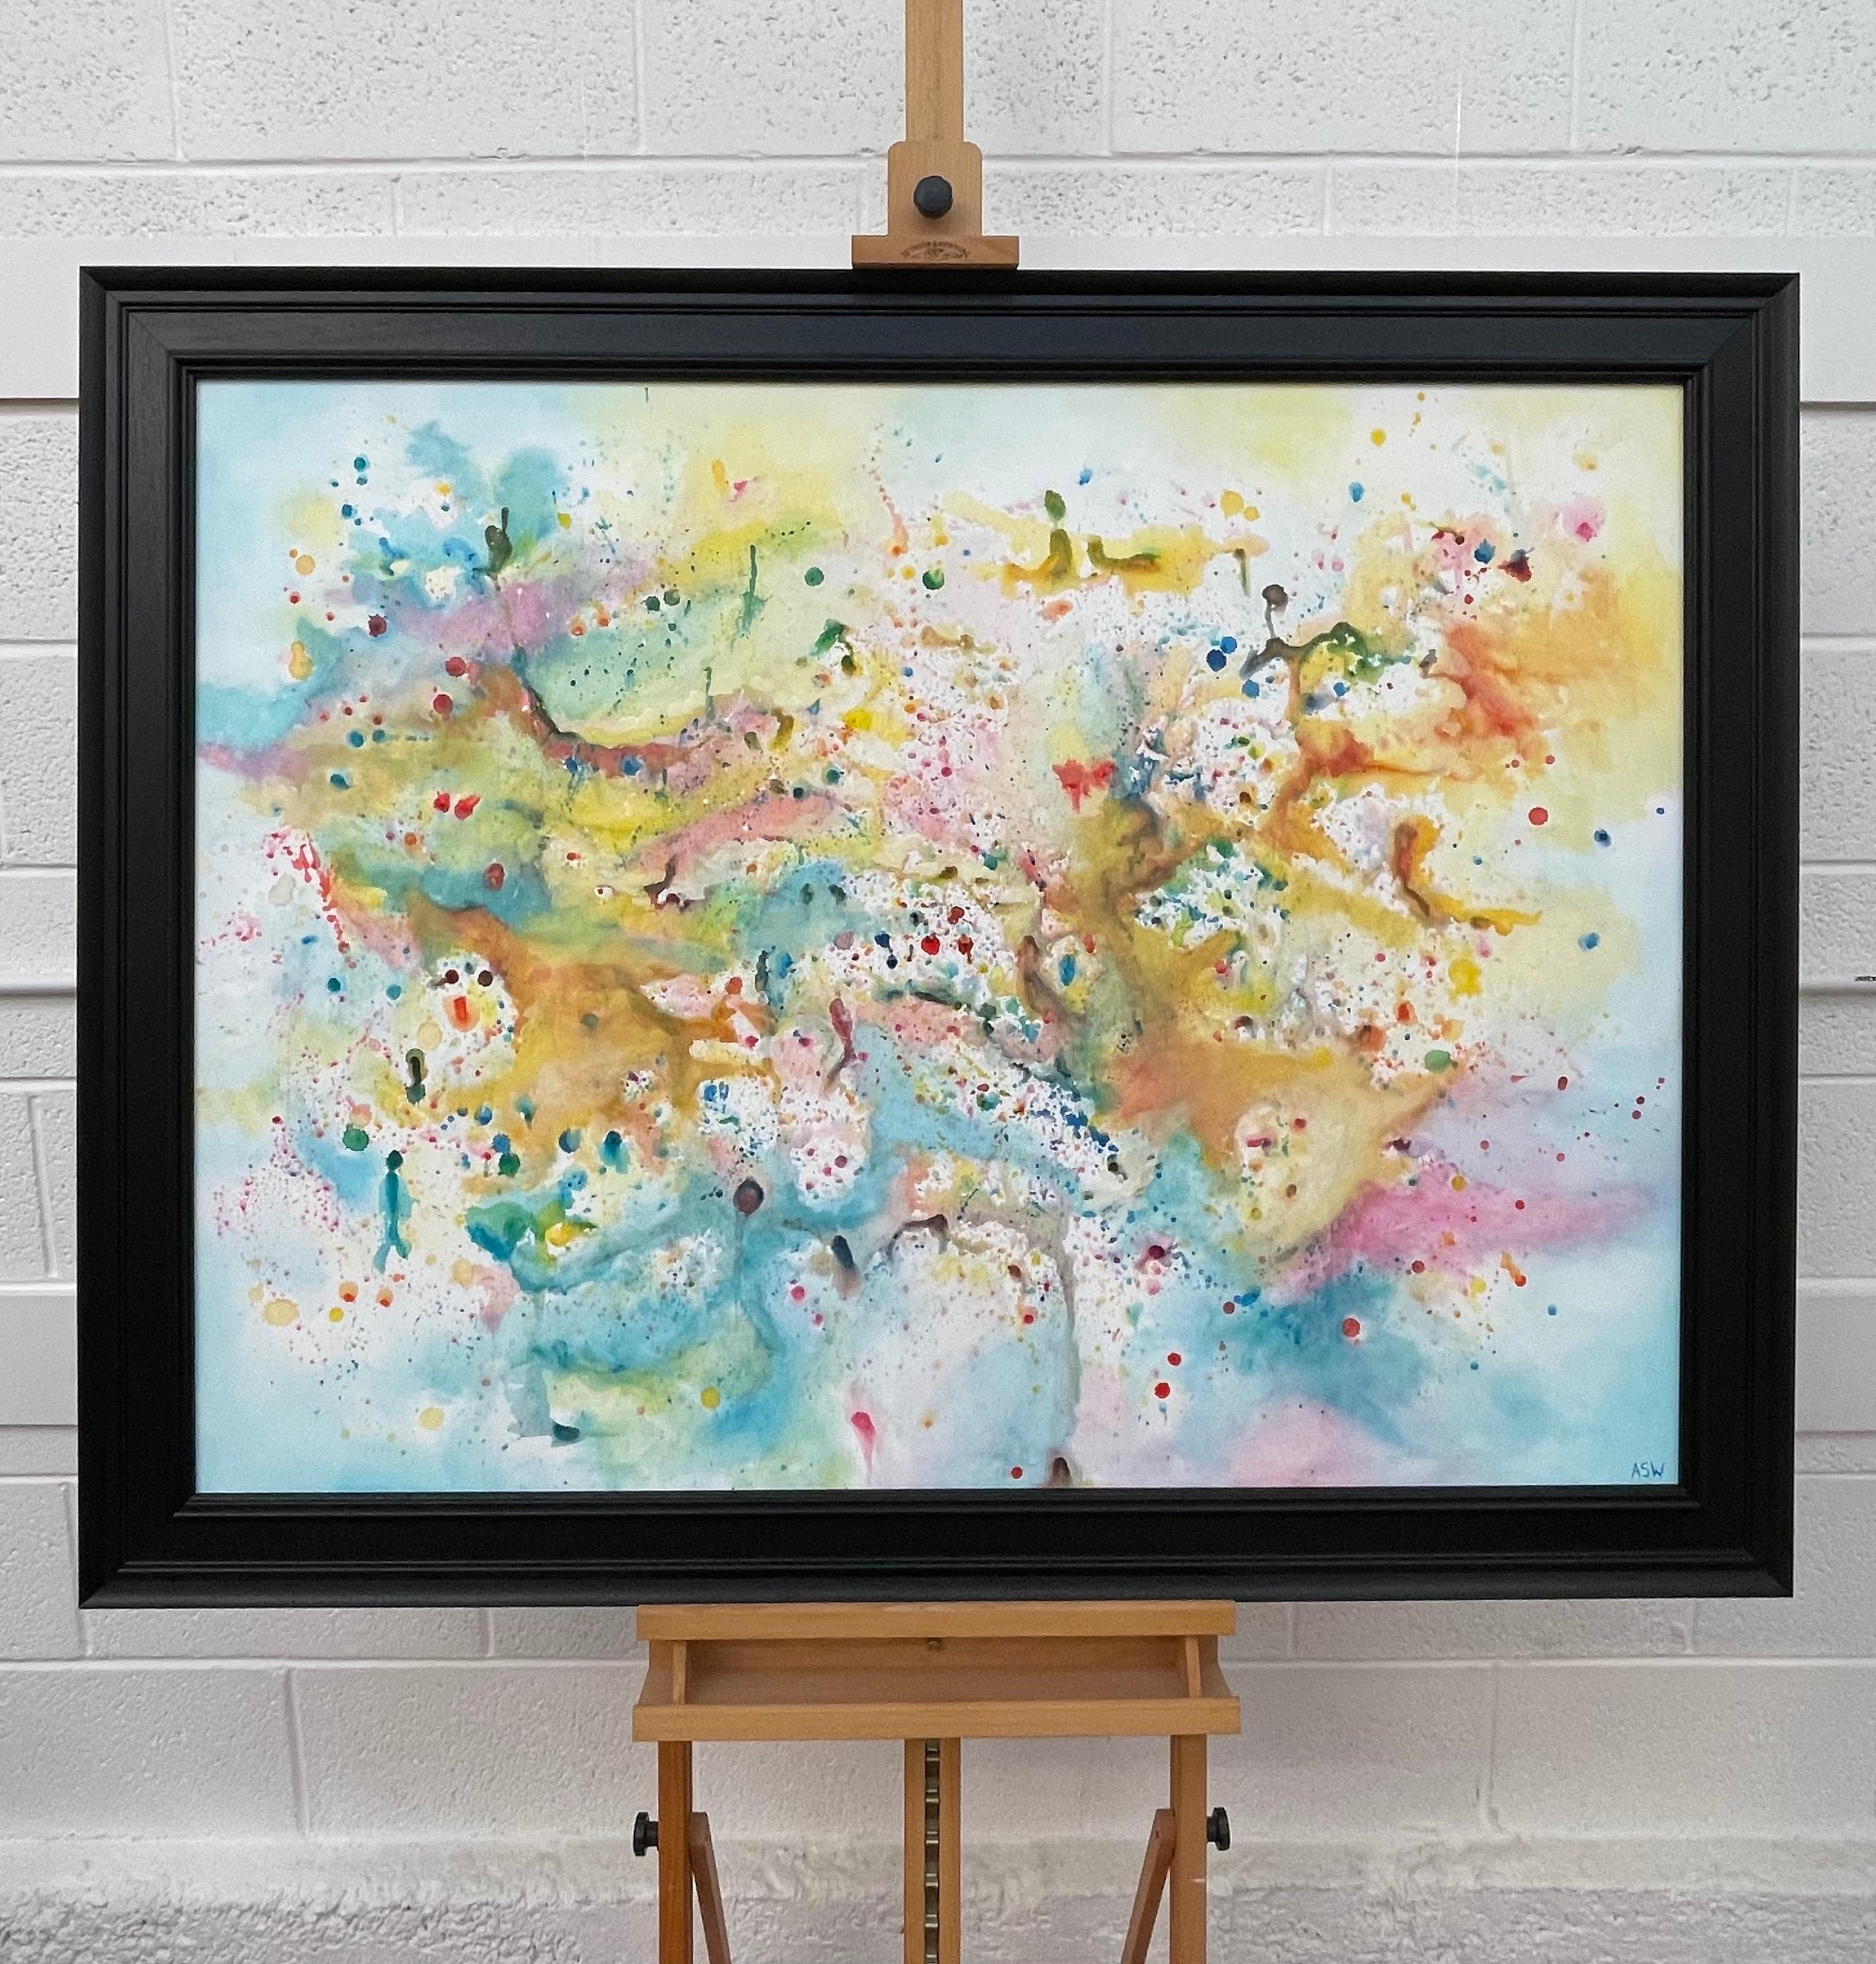 Light Colourful Abstract Art on White Background by Contemporary British Artist For Sale 17